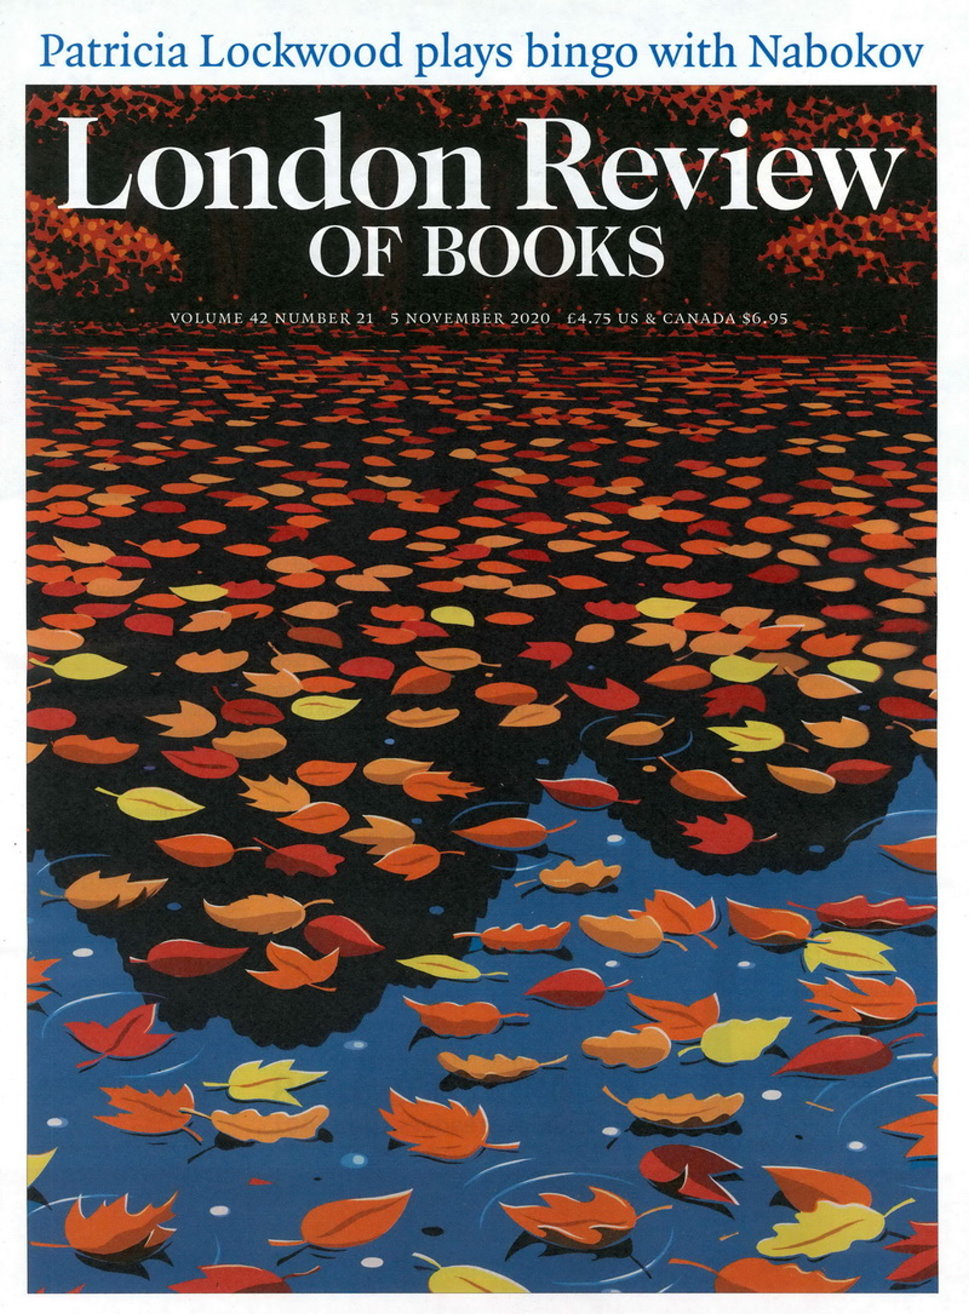 London Review OF BOOKS 11月5日/2020